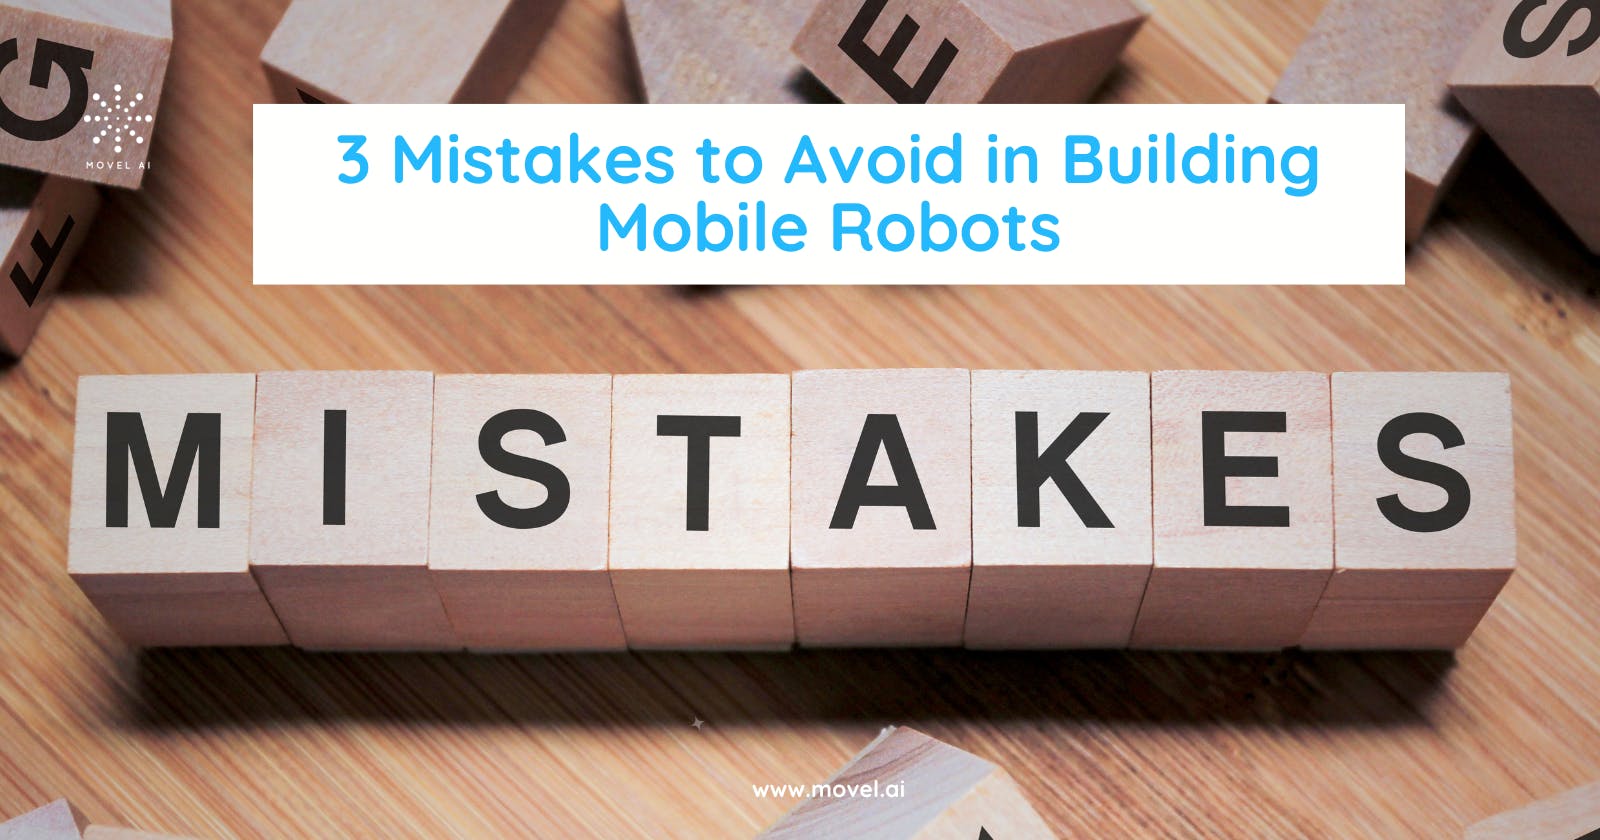 3 Mistakes to Avoid in Building Mobile Robots